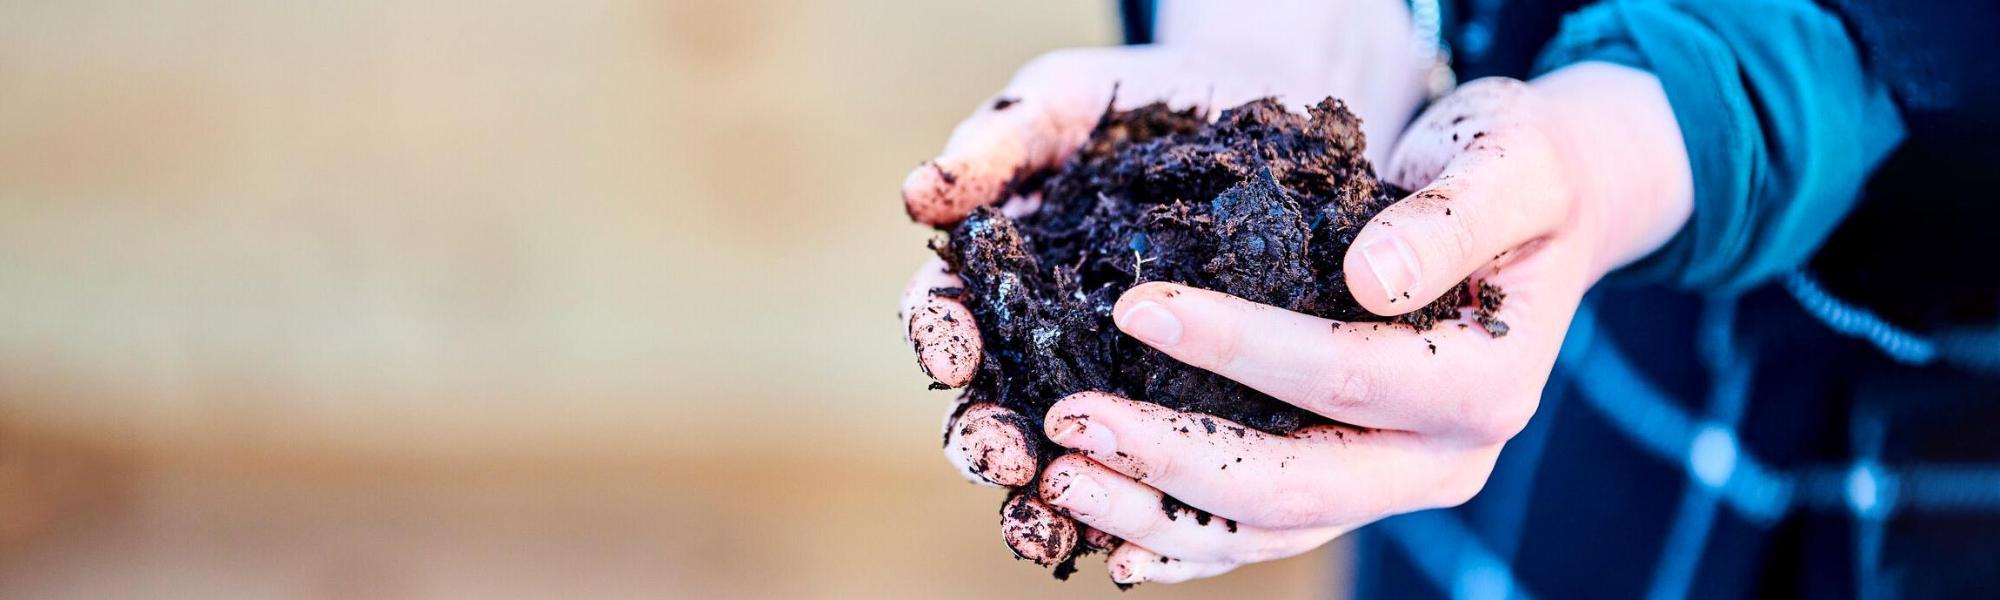 Hands holding compost